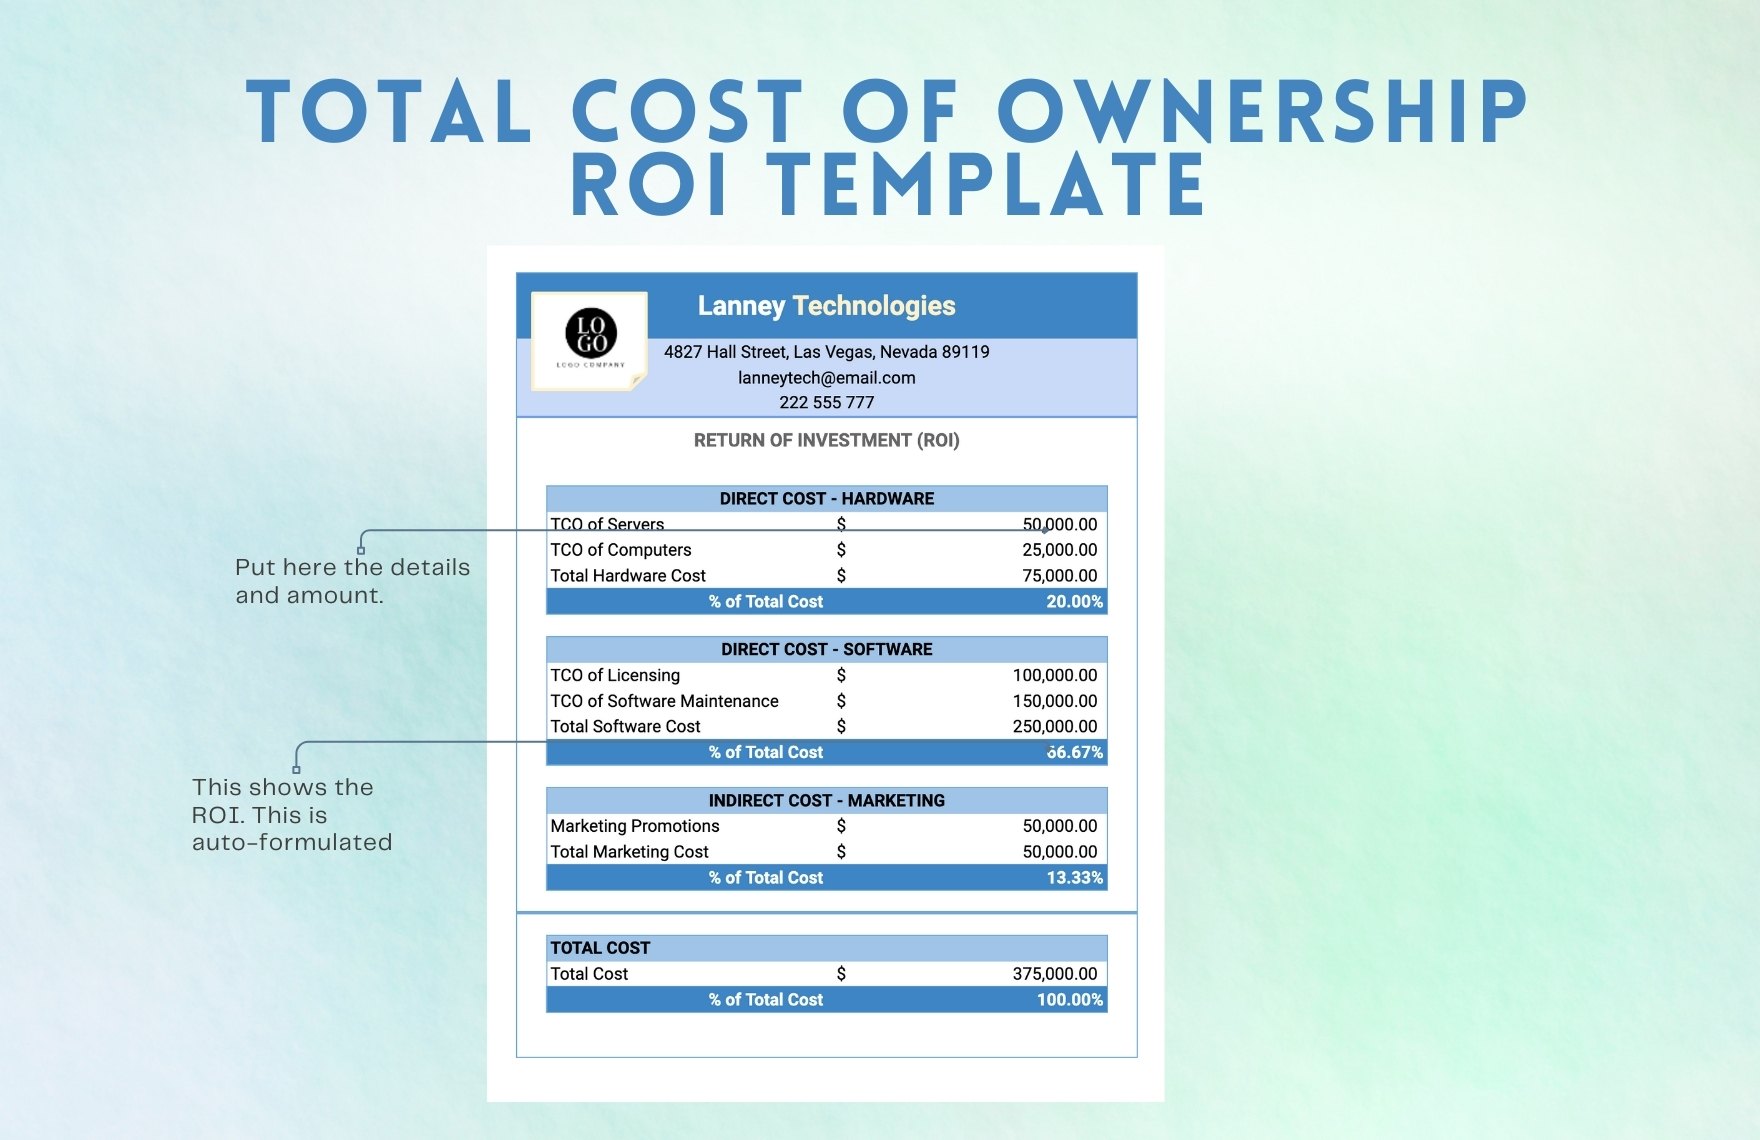 Total Cost Of Ownership ROI Template